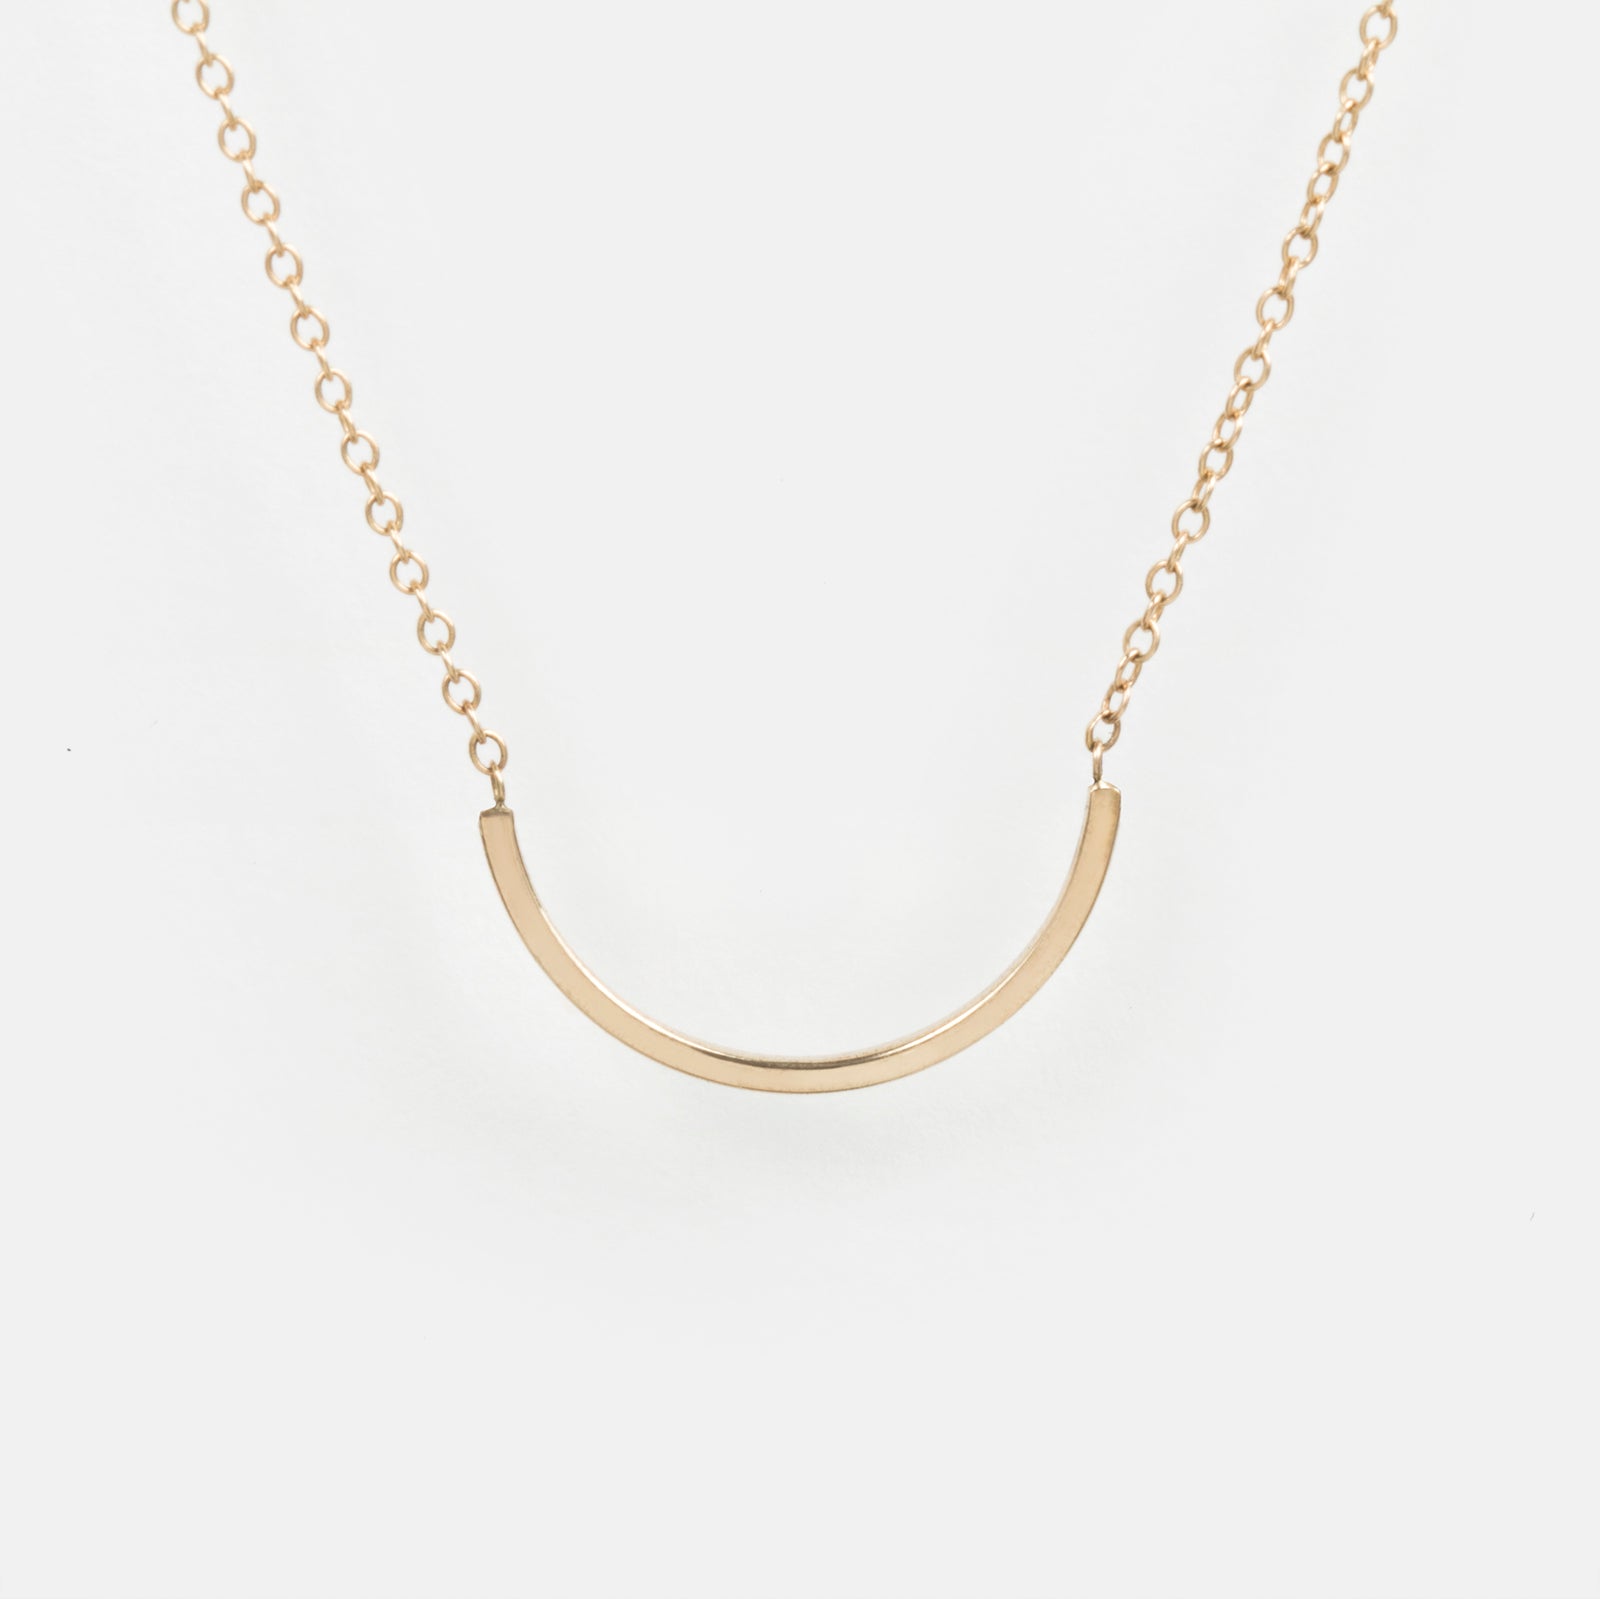 Uva Unisex Necklace in 14k Gold By SHW Fine Jewelry New York City